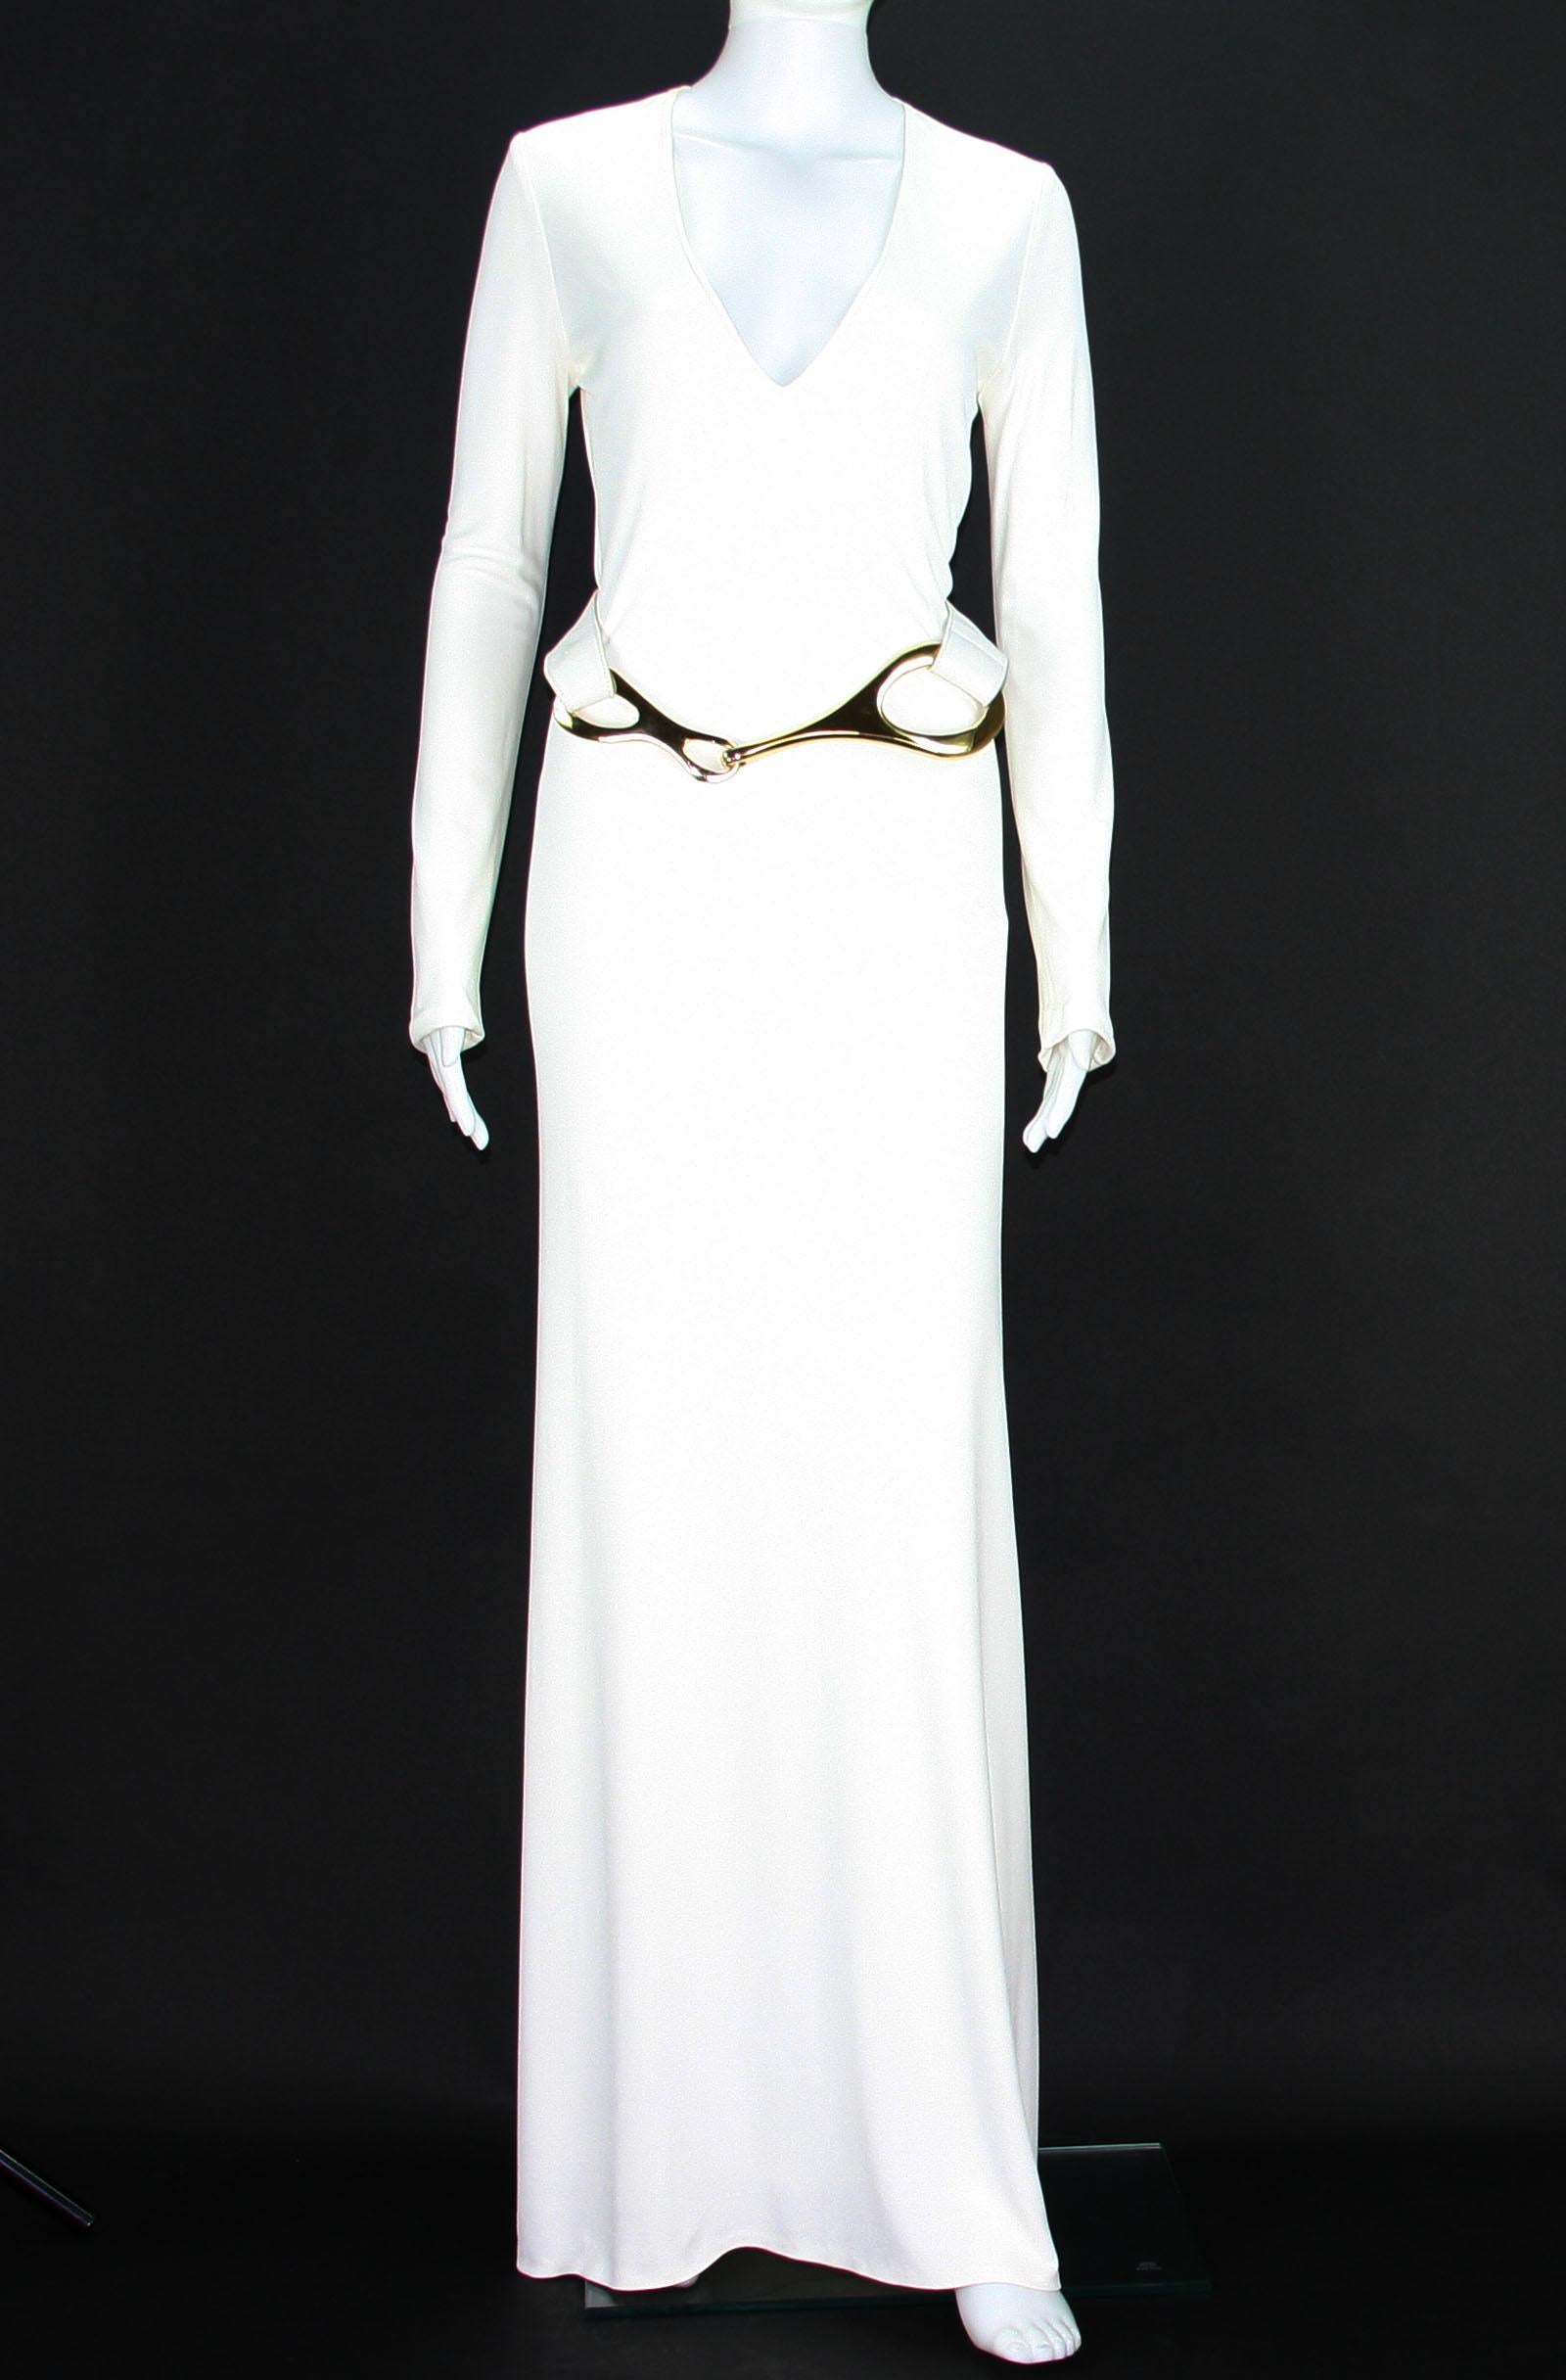 Rare and Famous Tom Ford for Gucci Museum White Jersey Belted Dress Gown
Classy and Timeless Chic
F/W 1996 Collection
Designer size 38
White Jersey, Fully Lined, Detachable Gold Metal Belt.
Made in Italy
Dress in Excellent Condition, Belt Need Small